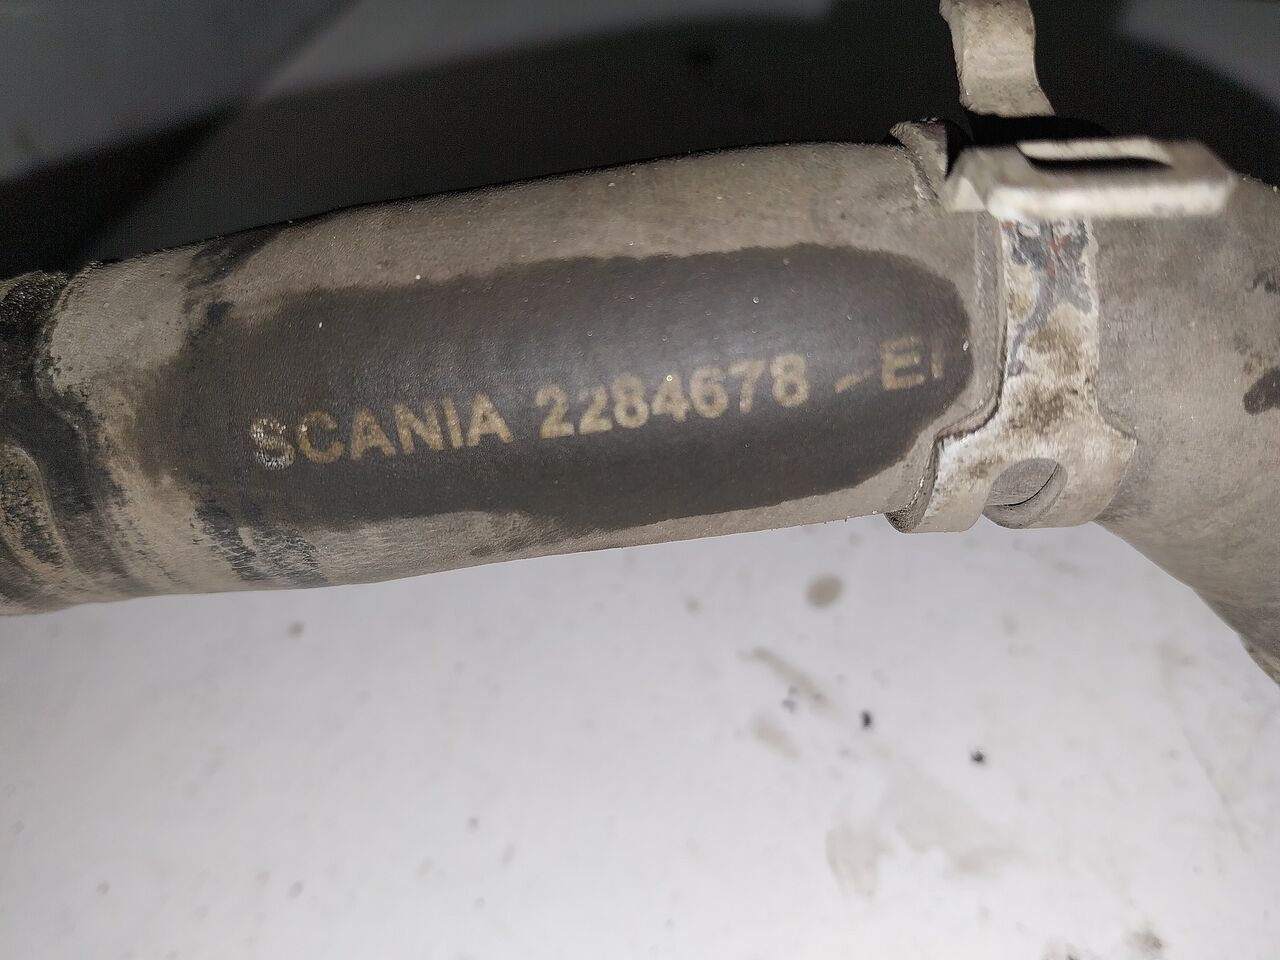 Scania R450 2284678 cooling pipe for Scania L,P,G,R,S series truck